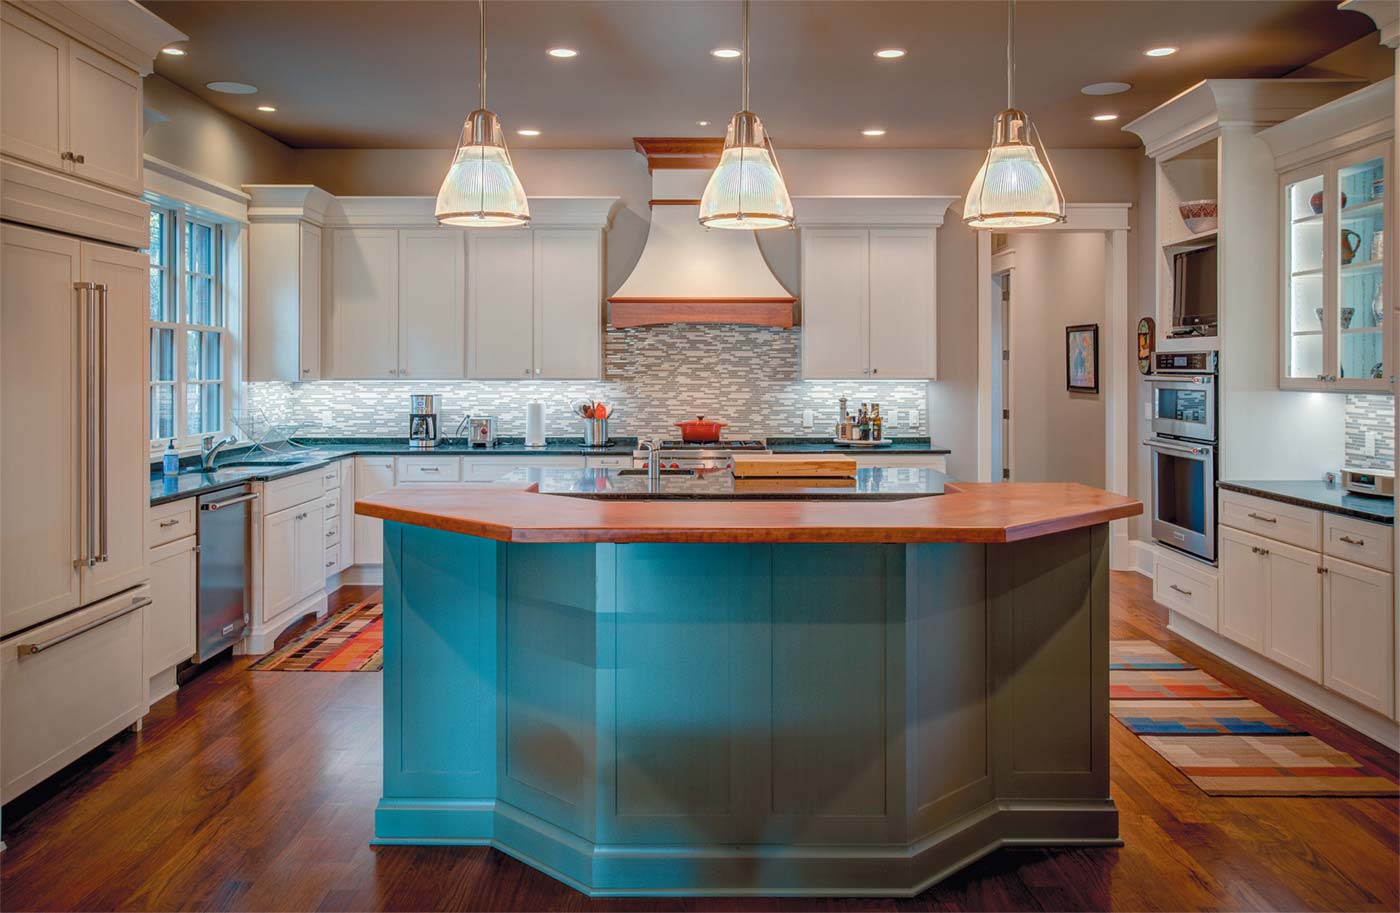 A striking open kitchen design submitted by Sister Bay Trading Company.